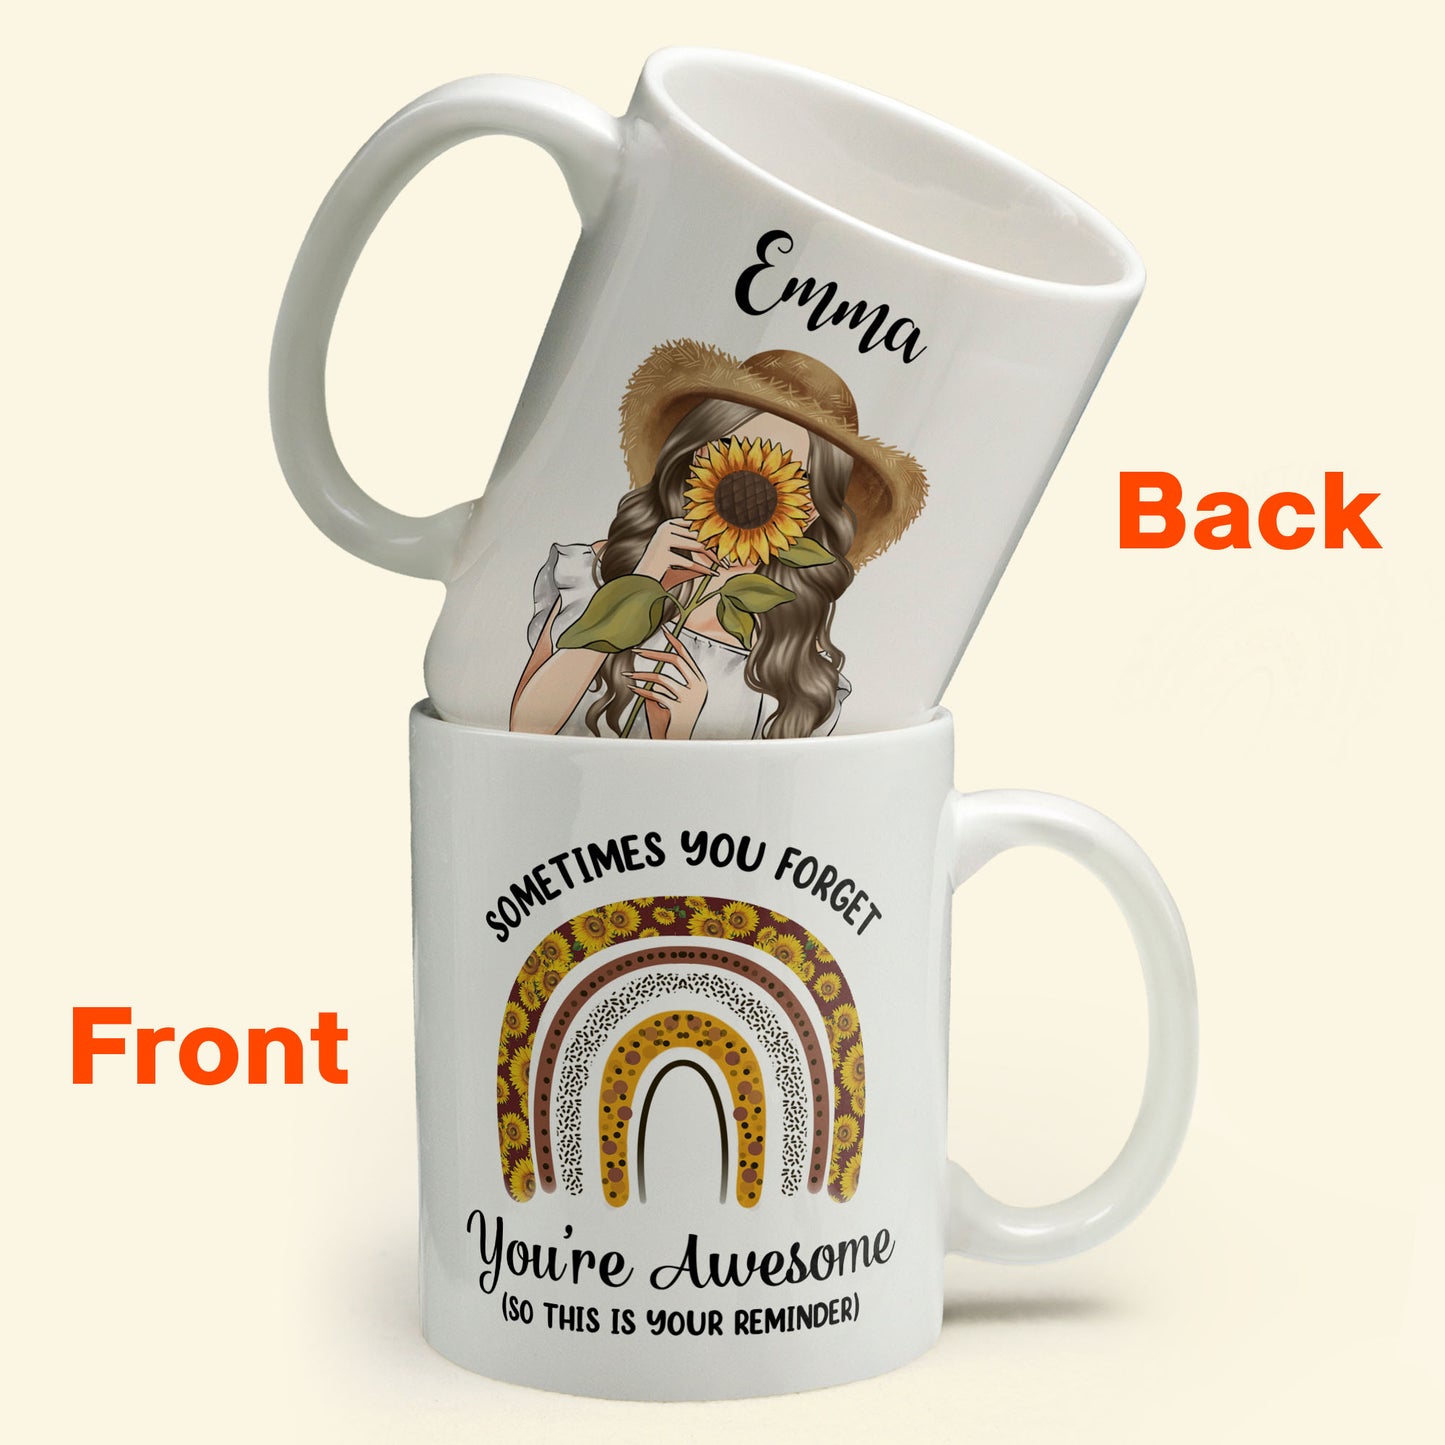 Sometimes You Forget You're Awesome  So This Is Your Reminder - Personalized Mug - Birthday Gift For Girl, Woman, Her - Sunflower Girl